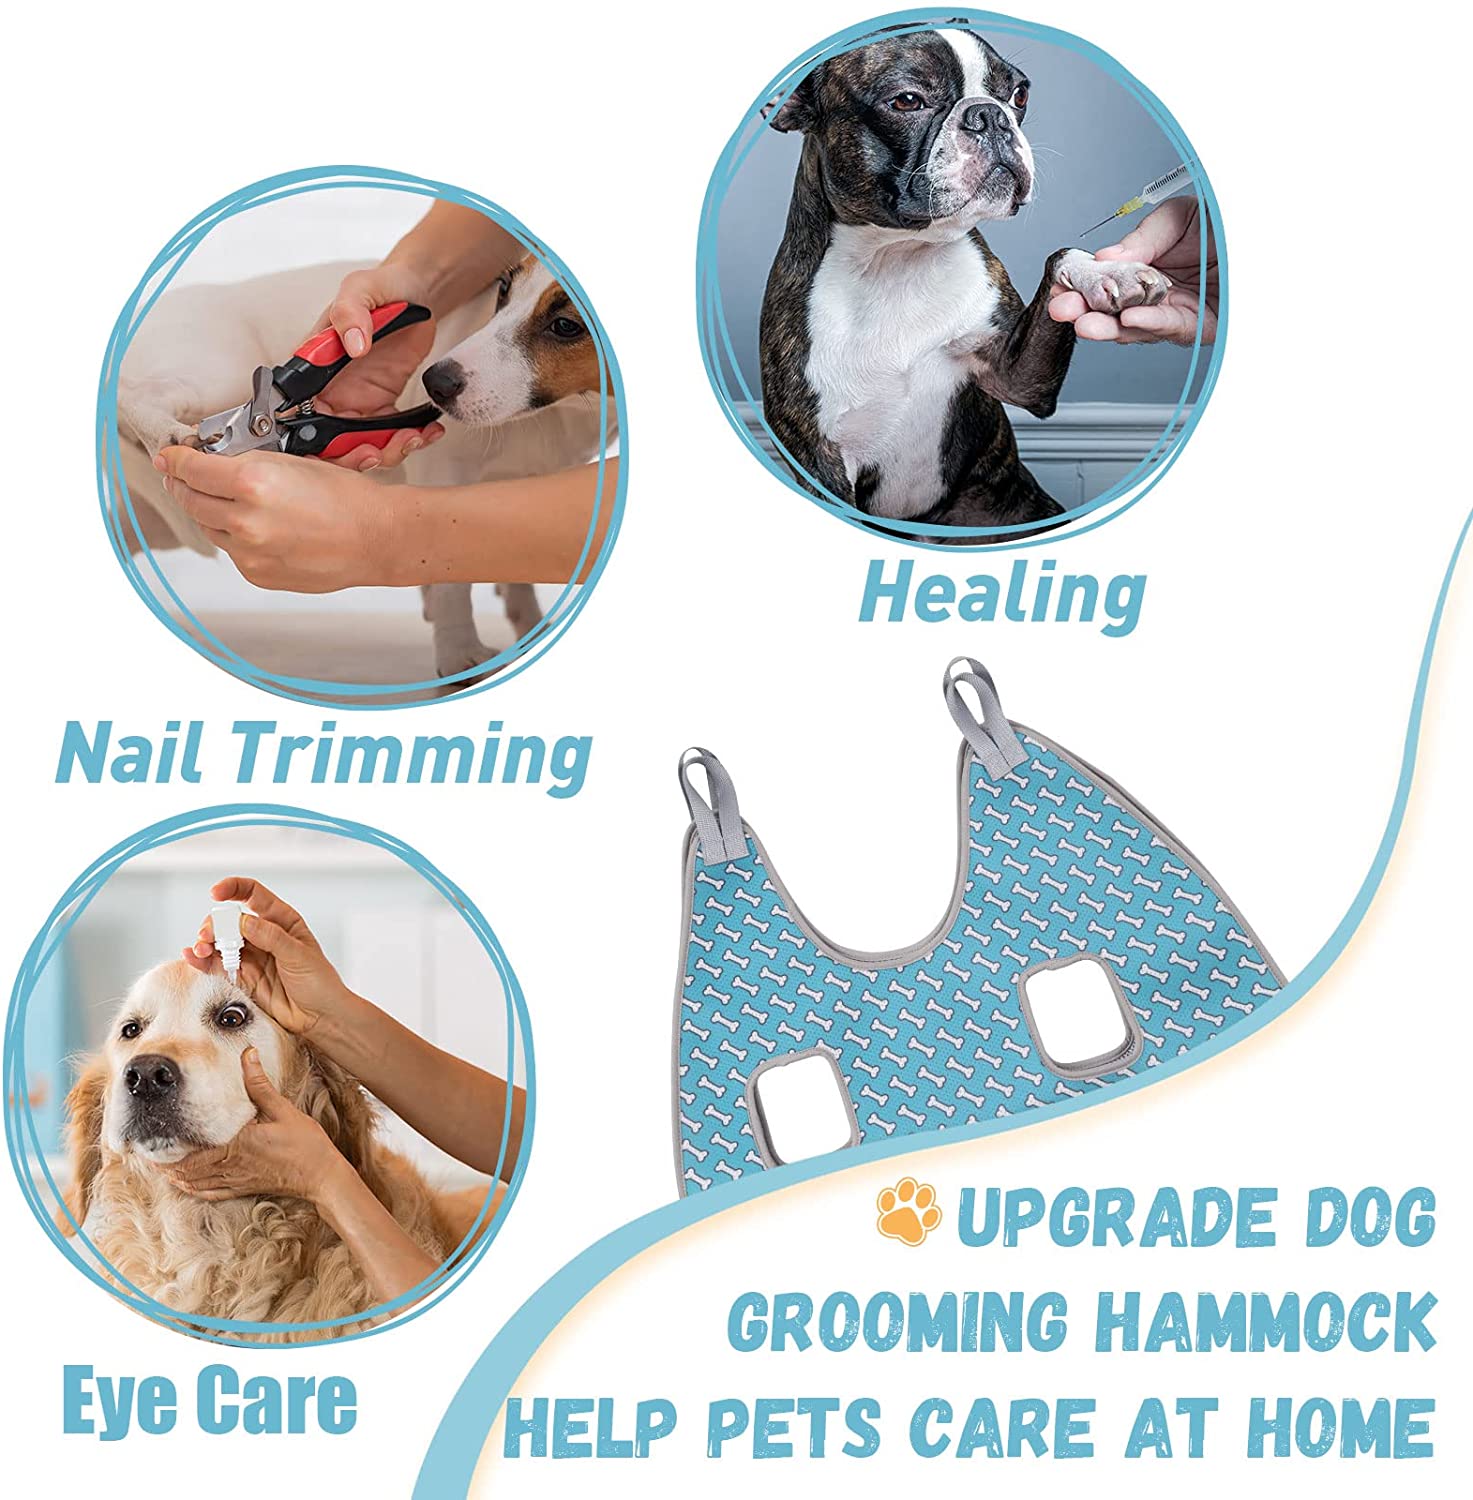 Pet Grooming Hammock Chest Harness For Cats And Dogs Relaxation Dog Grooming Hammock Restraint Bag Dog Backpack Sling For Grooming Dog Grooming Assistant Nail Trimming Scissors Bathing